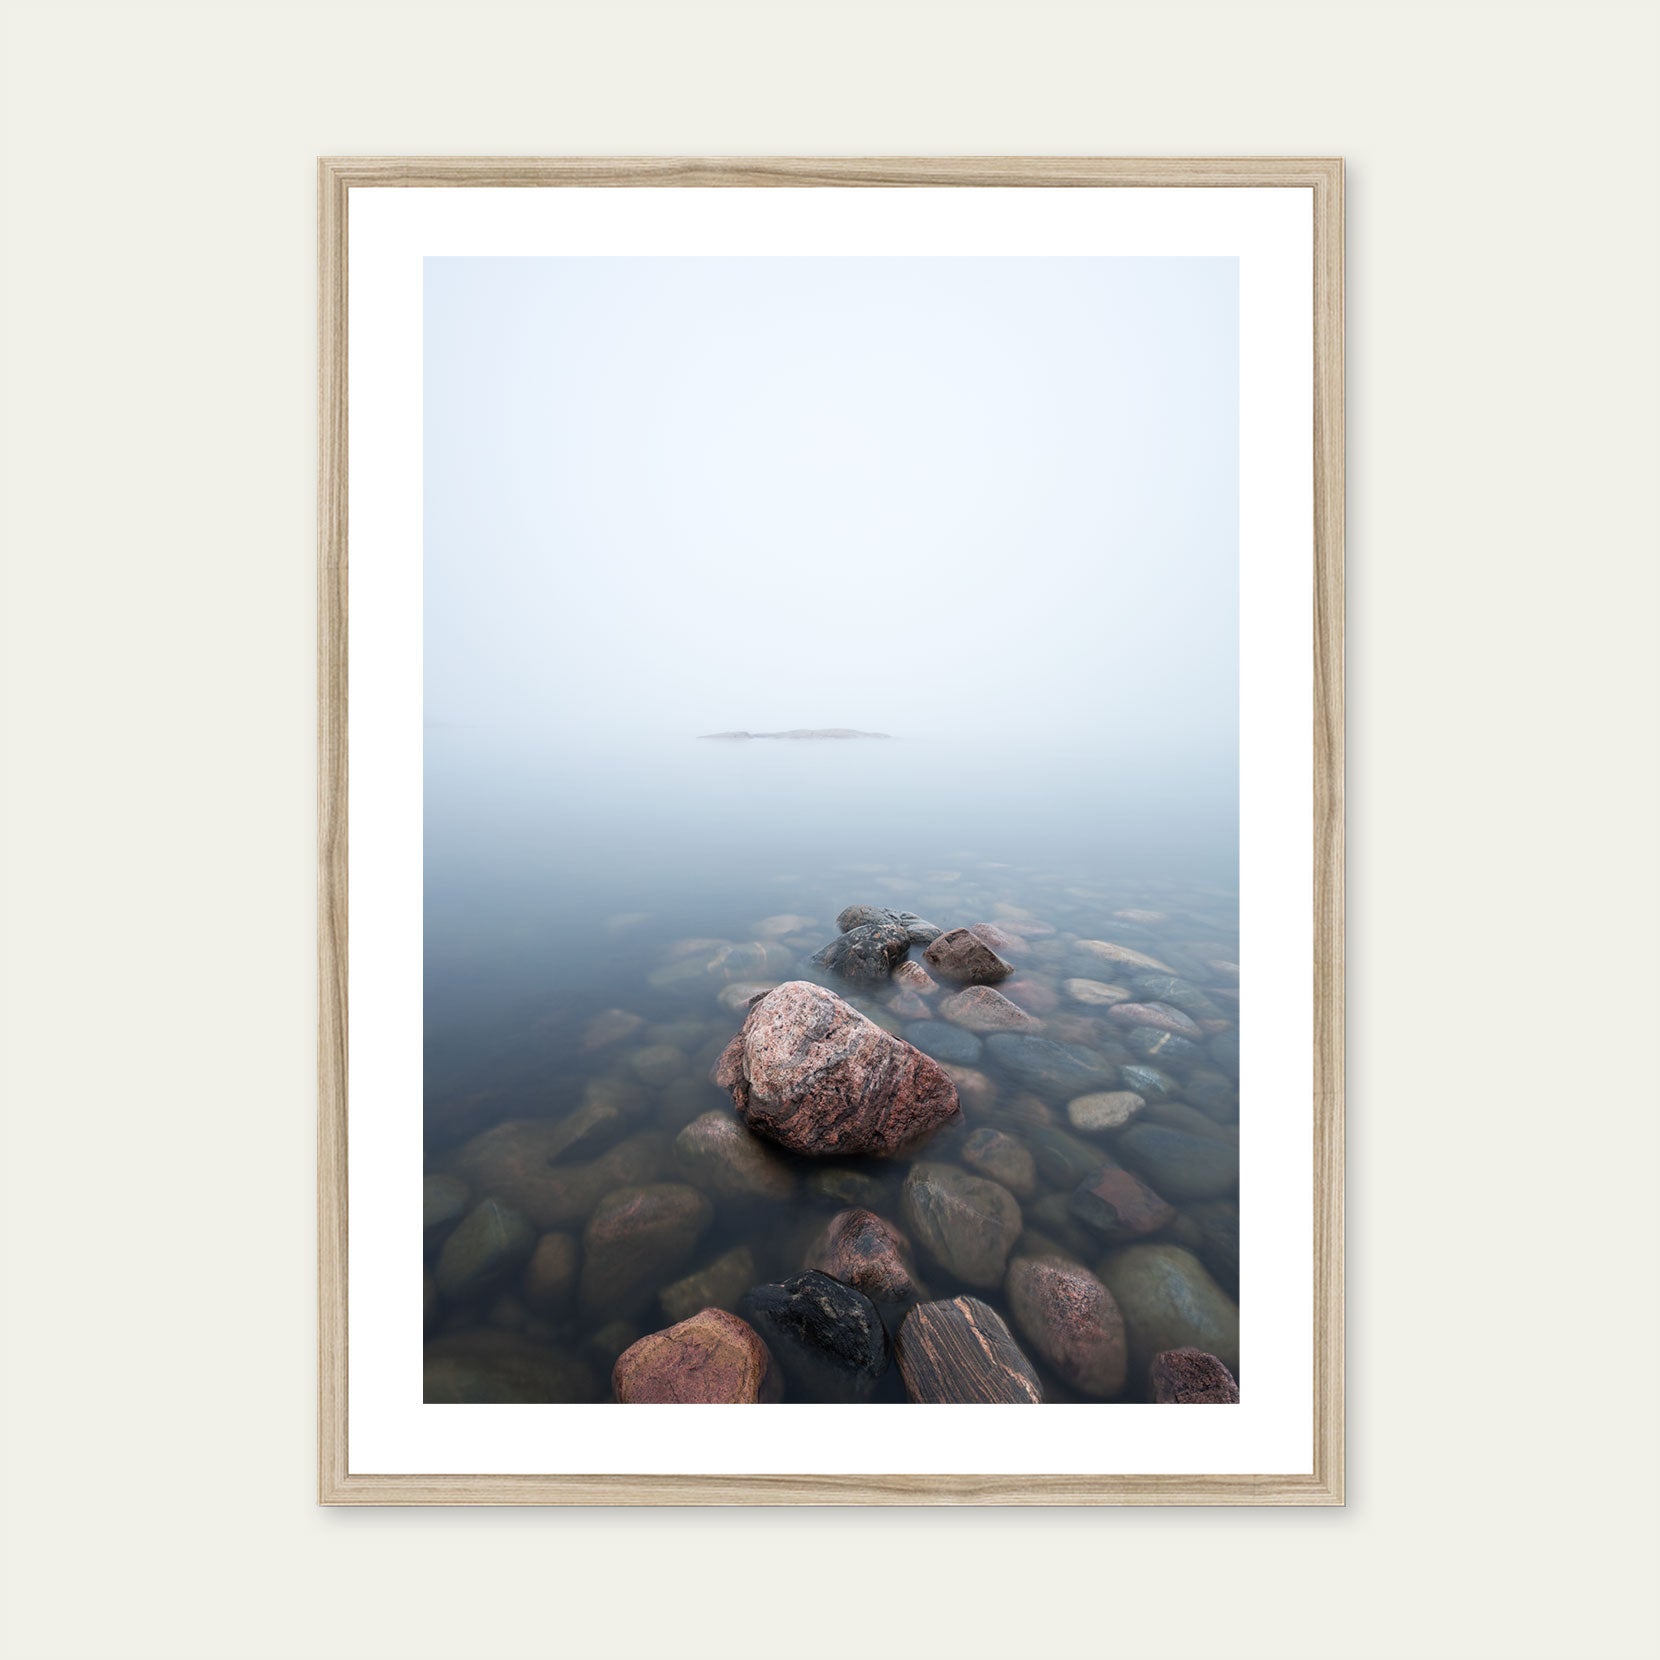 A wood framed print of rocks in the sea on a foggy day